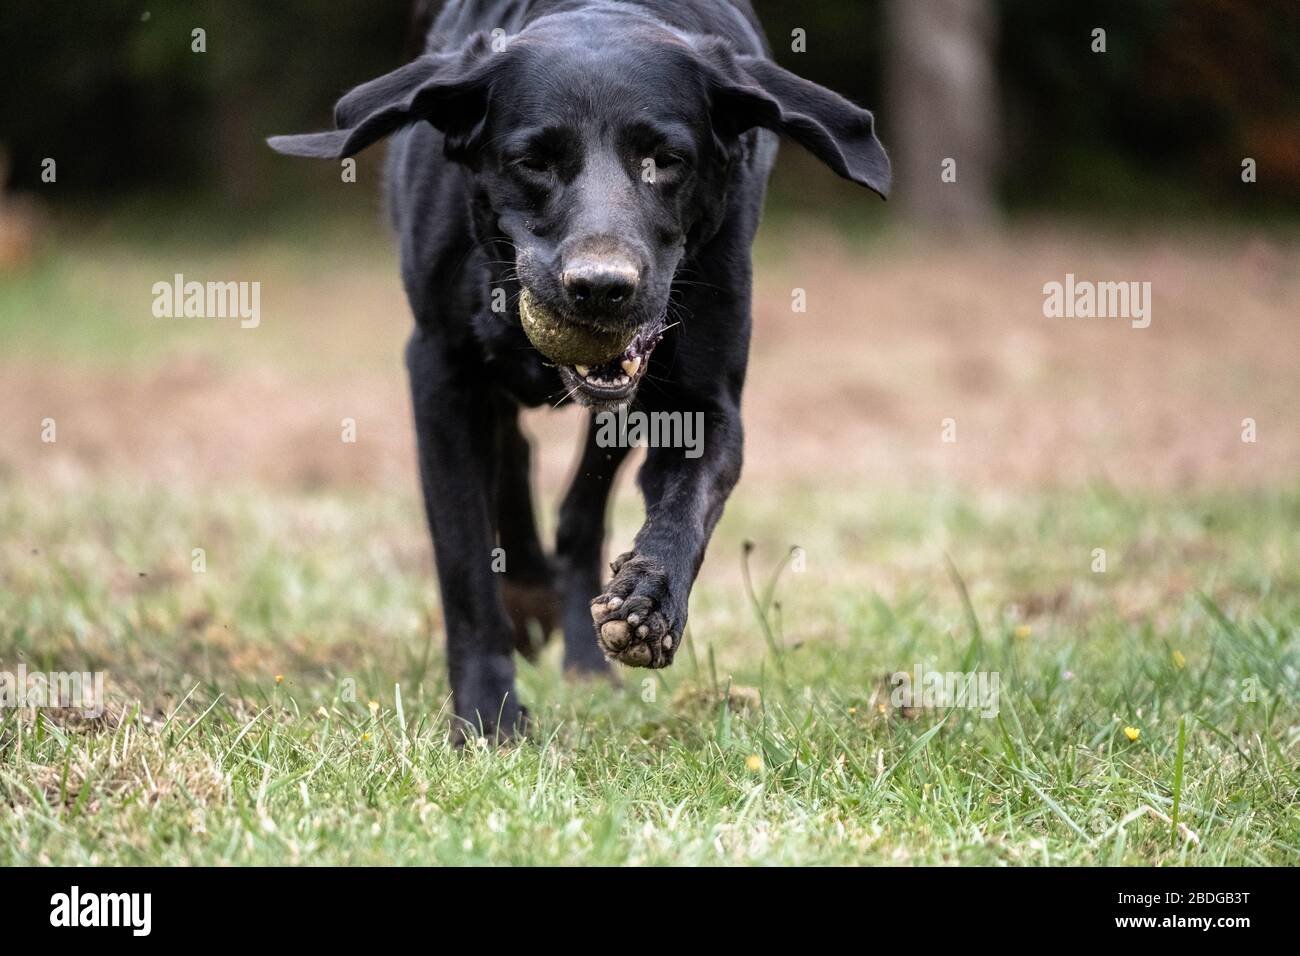 Piencourt, Normandy, France. A black labrador dog runs with a tennis ball in its mouth. Stock Photo